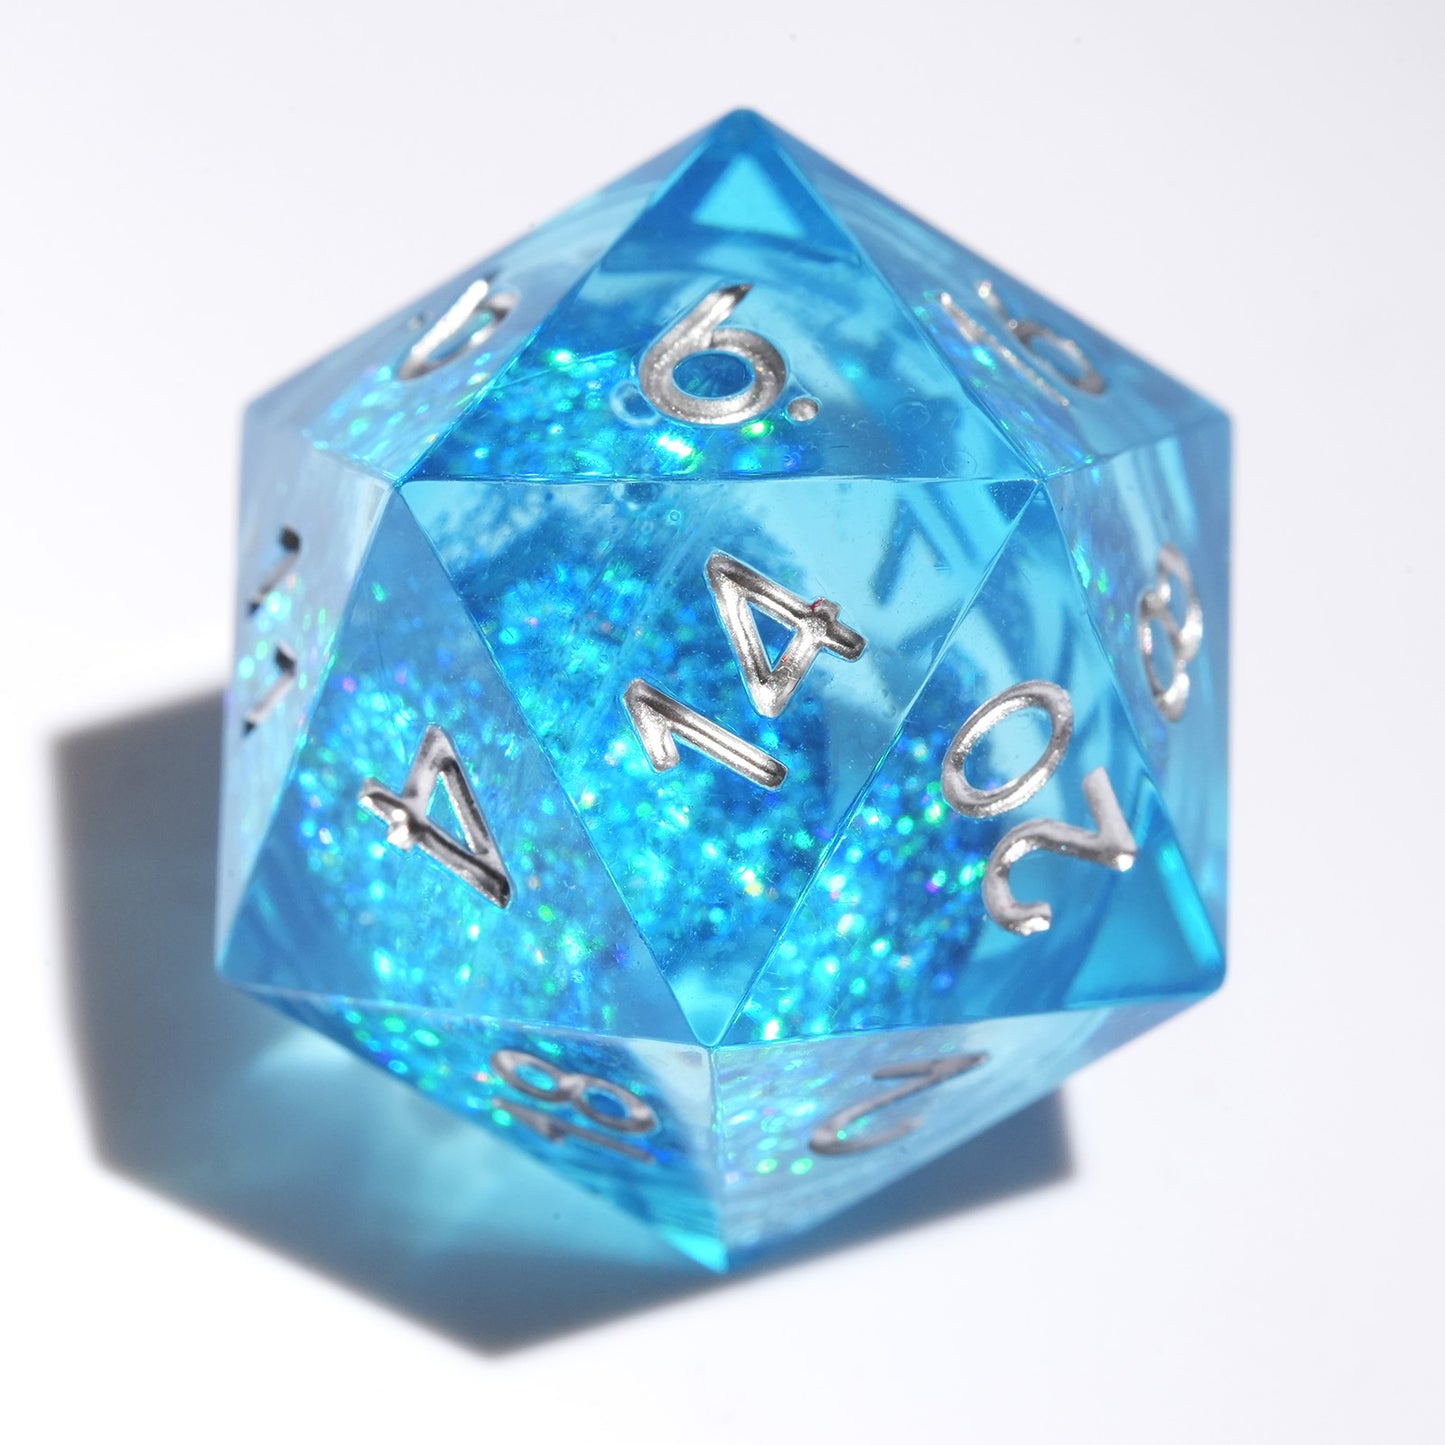 Liquid Core Resin Dice Set, Blue + Silver Numbers